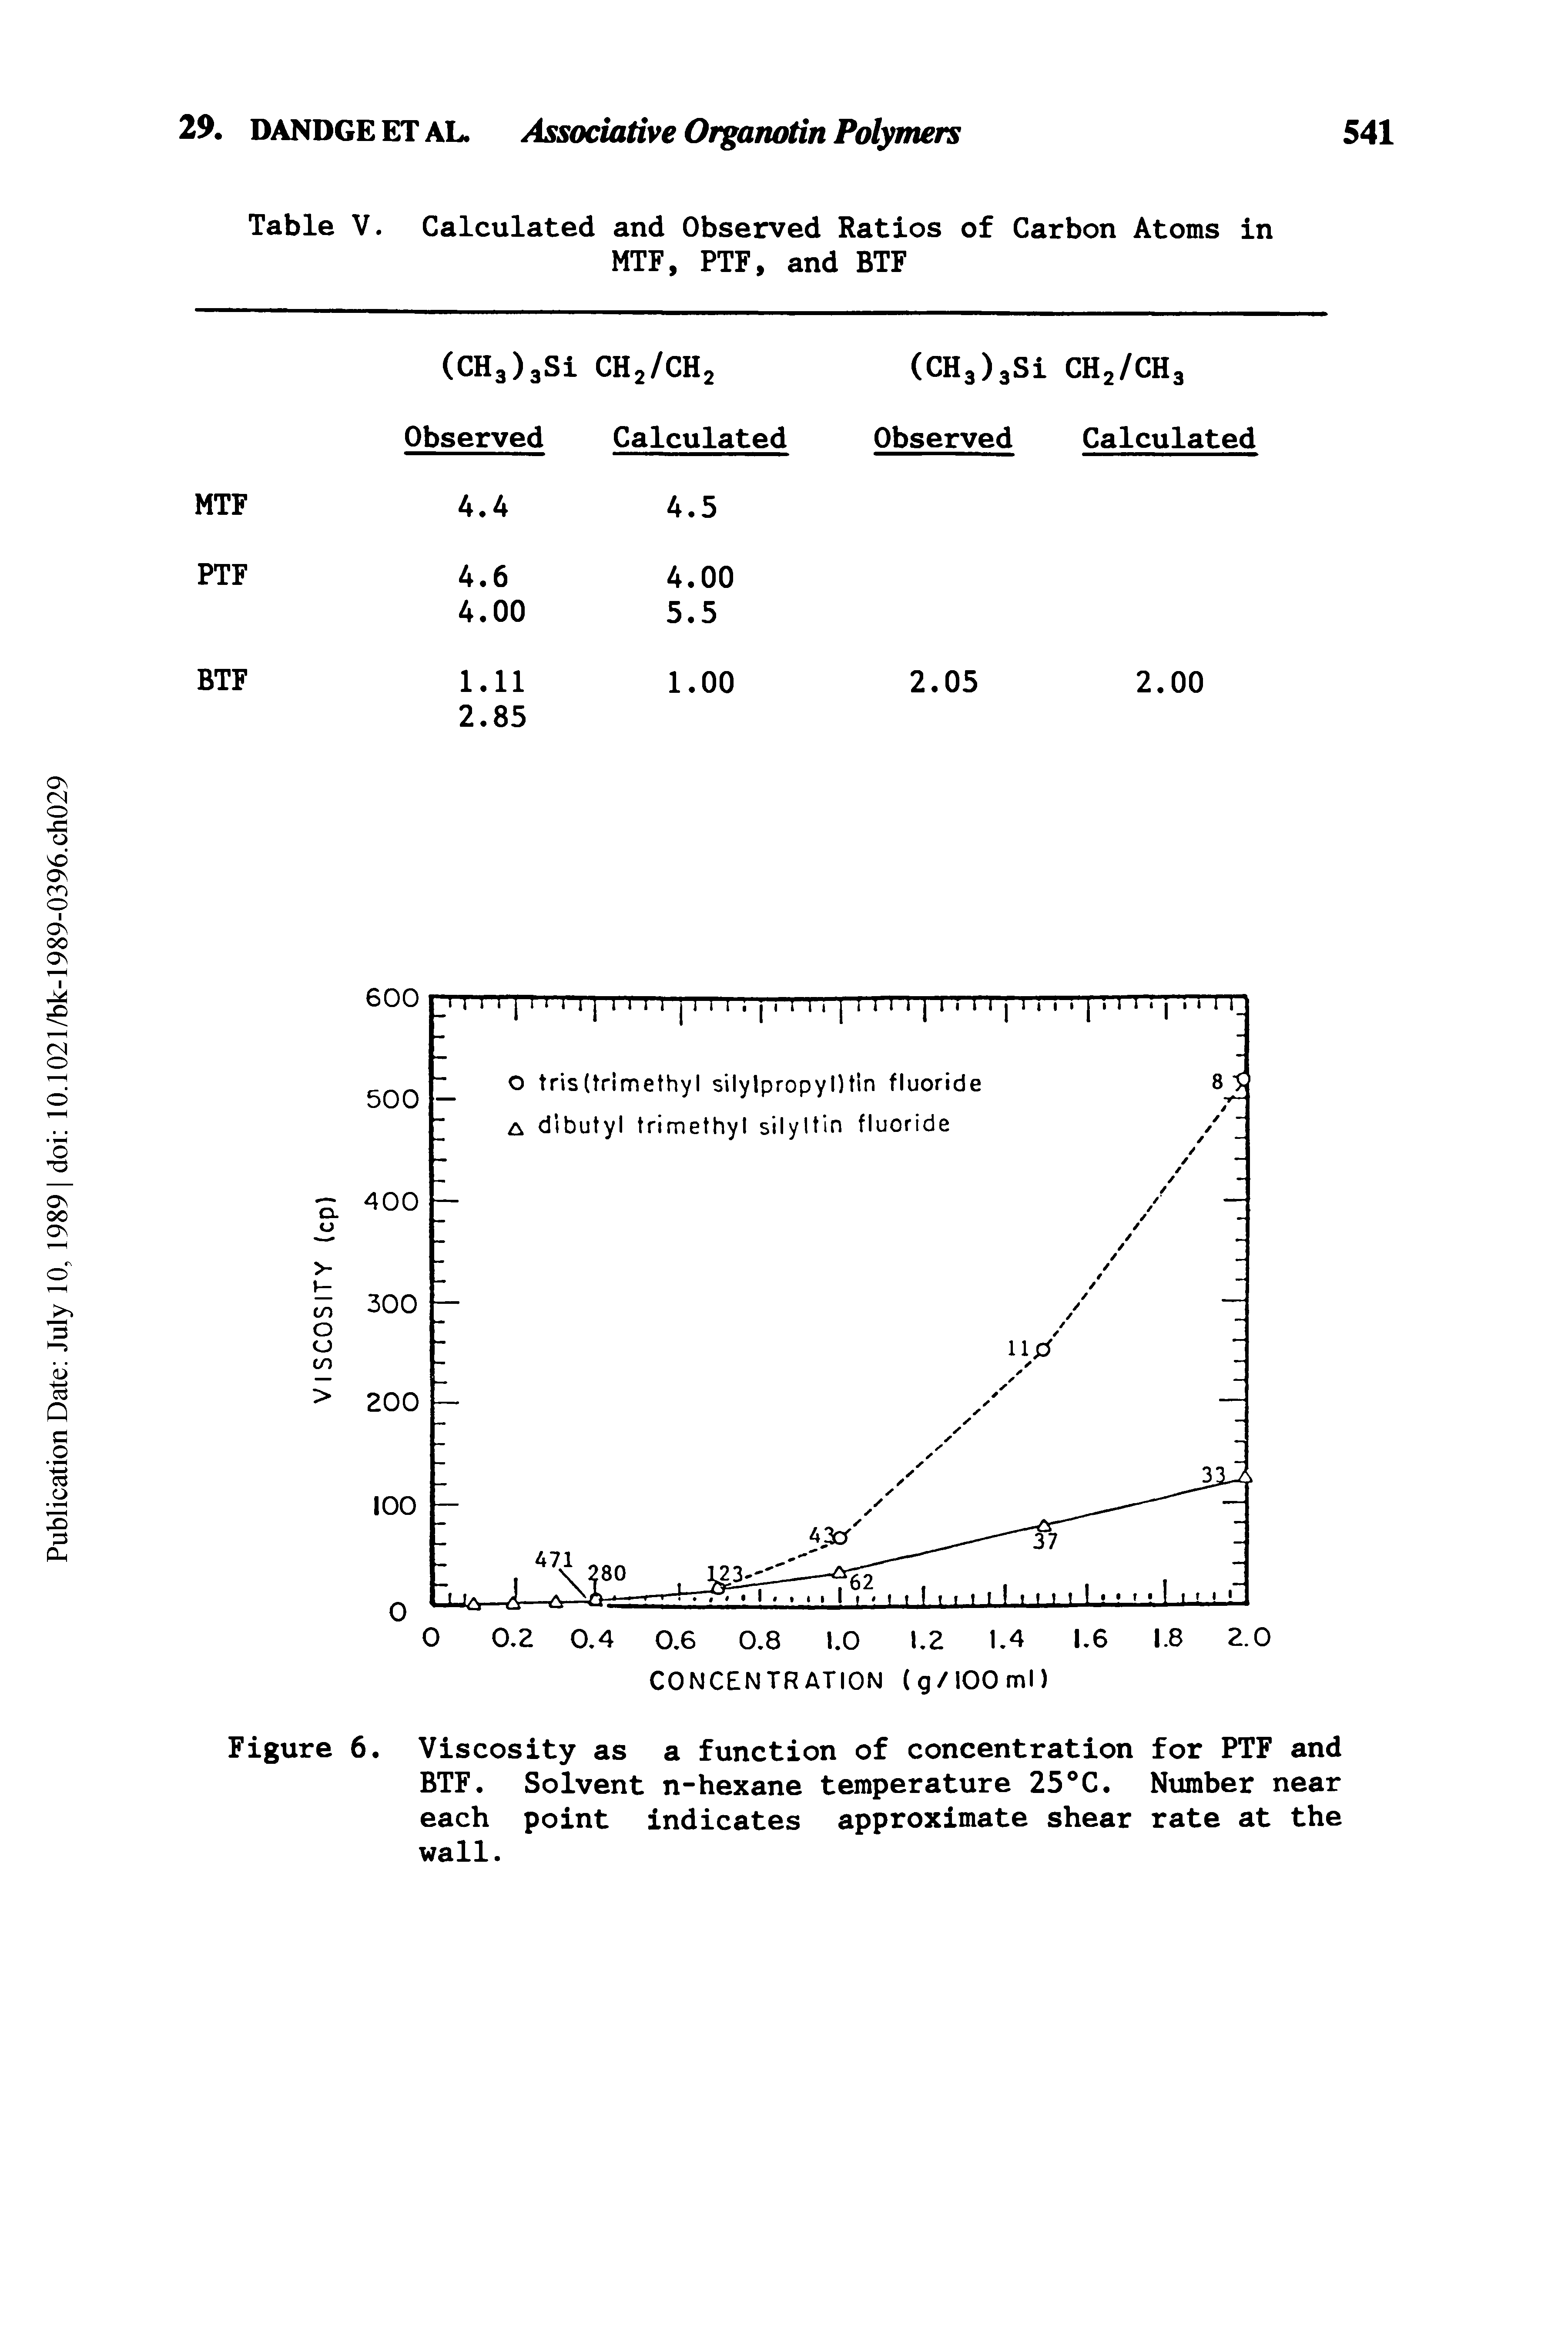 Figure 6. Viscosity as a function of concentration for PTF and BTF. Solvent n-hexane temperature 25°C. Number near each point indicates approximate shear rate at the wall.